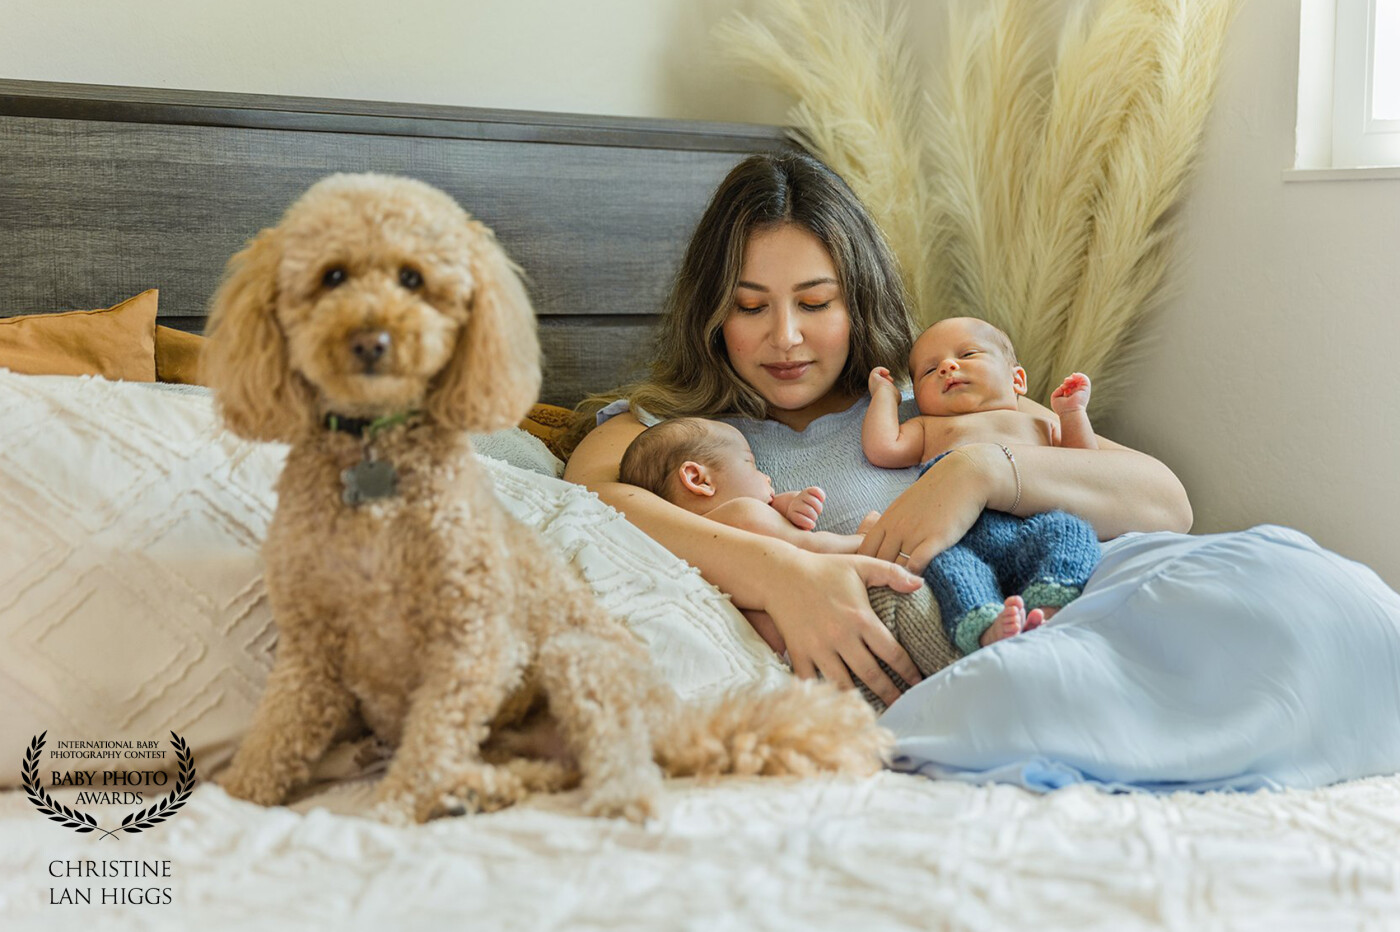 This beautiful mother and her dog, Milo, are twice blessed with these precious identical twin boys.